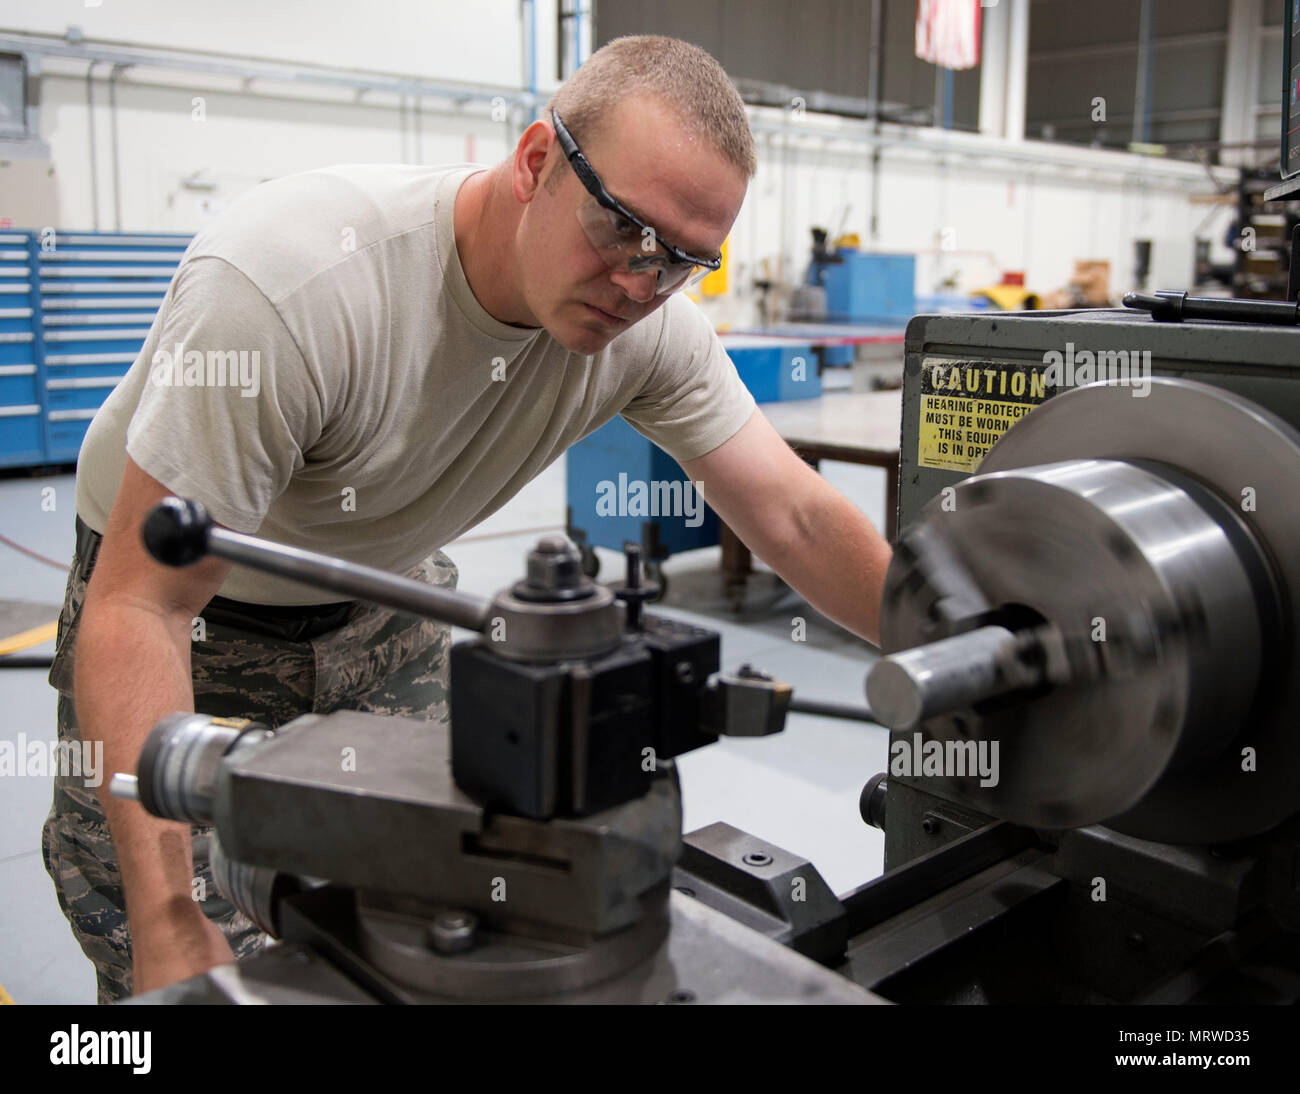 U.S. Air Force Staff Andrew Walker, a fabrication specialist with the 379th Expeditionary Maintenance Squadron uses a manual lathe to create a cylindrical part at Al Udeid Air Base, Qatar, June 5, 2017. Walker is part of a team of machinists and welders which are trained on a wide range of manual and computer numerical controlled machines to manufacture and repair aircraft components and support equipment. (U.S. Air Force photo by Tech. Sgt. Amy M. Lovgren) Stock Photo